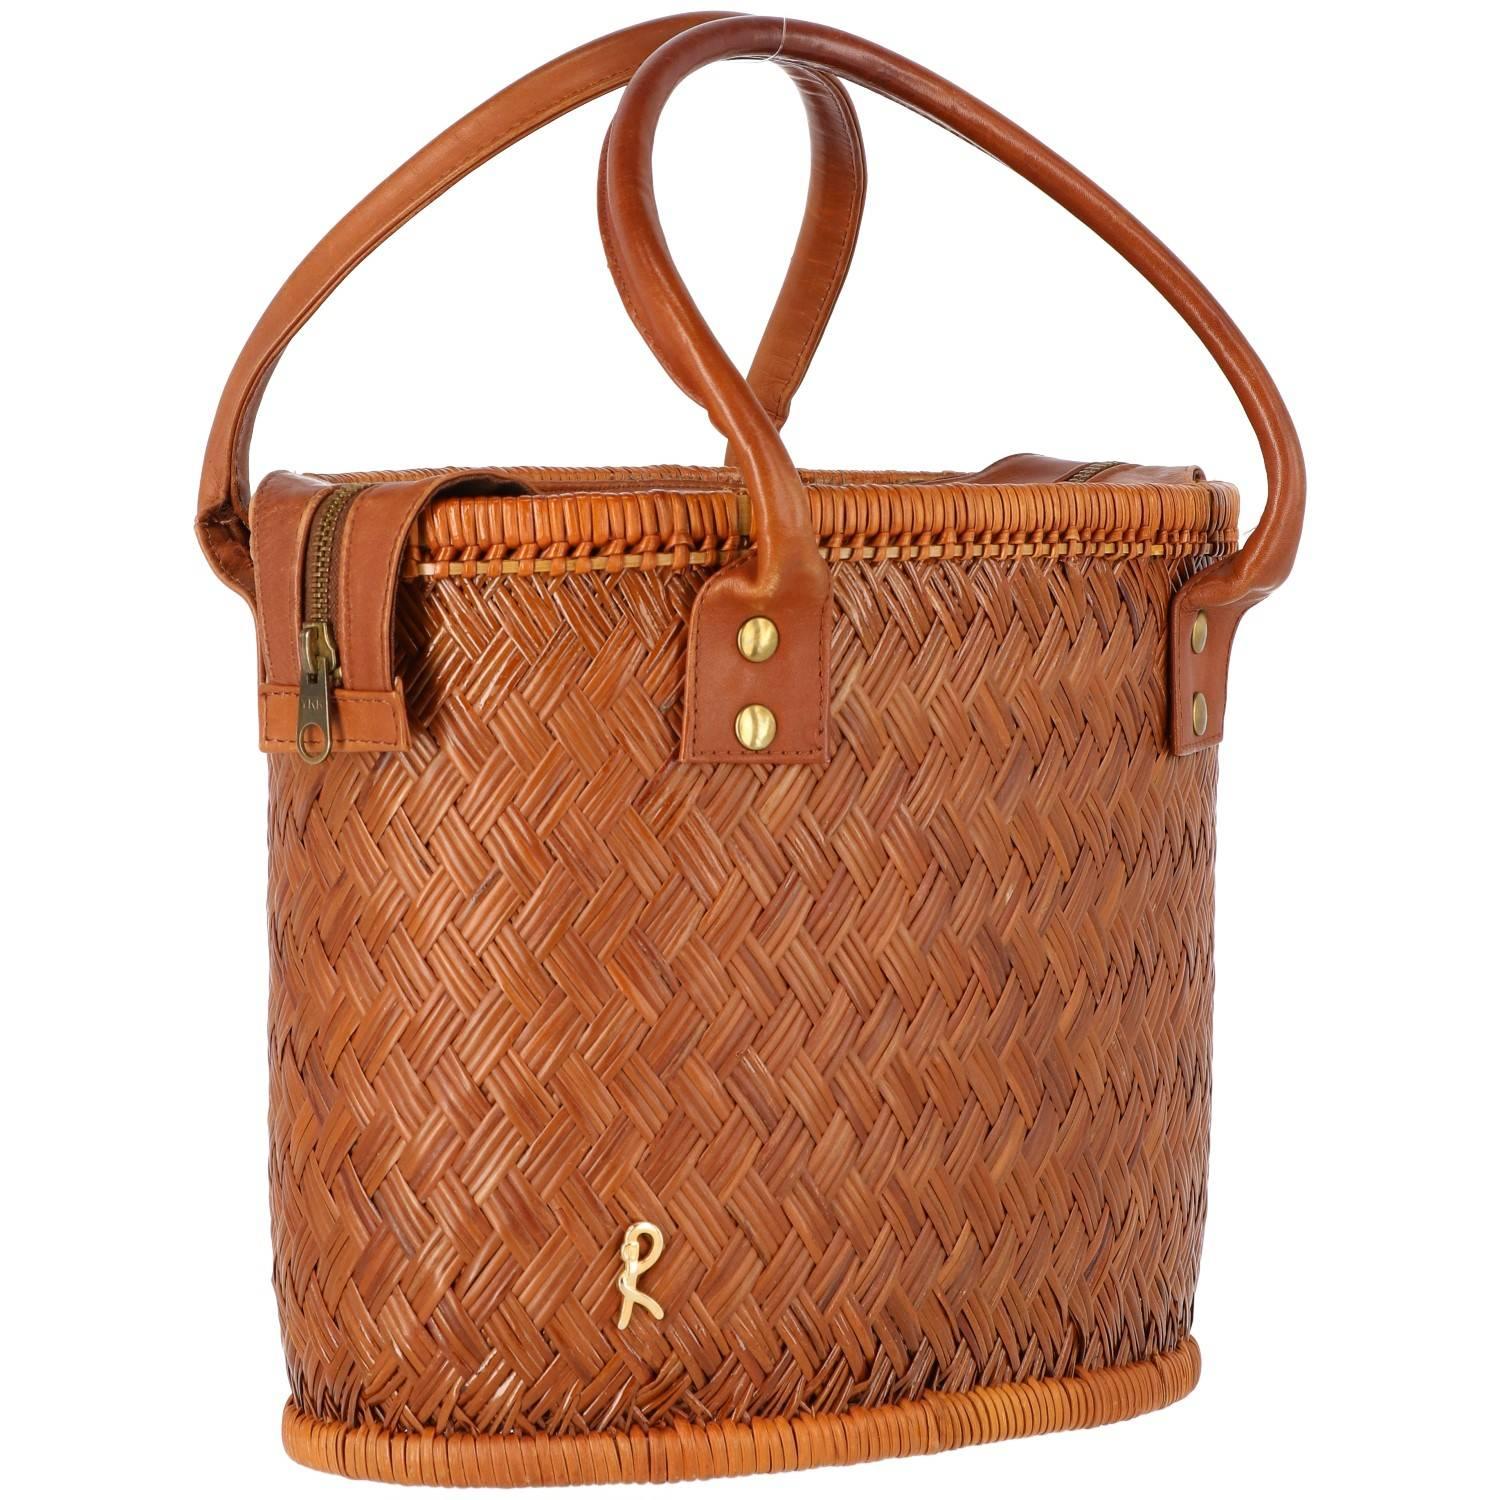 Vintage rattan bucket bag from the 1960s, with leather handles and closing surface. The inside features a lining with an applied pocket. A golden metal brand logo is applied on the front.

Handle Width: 13 cm
